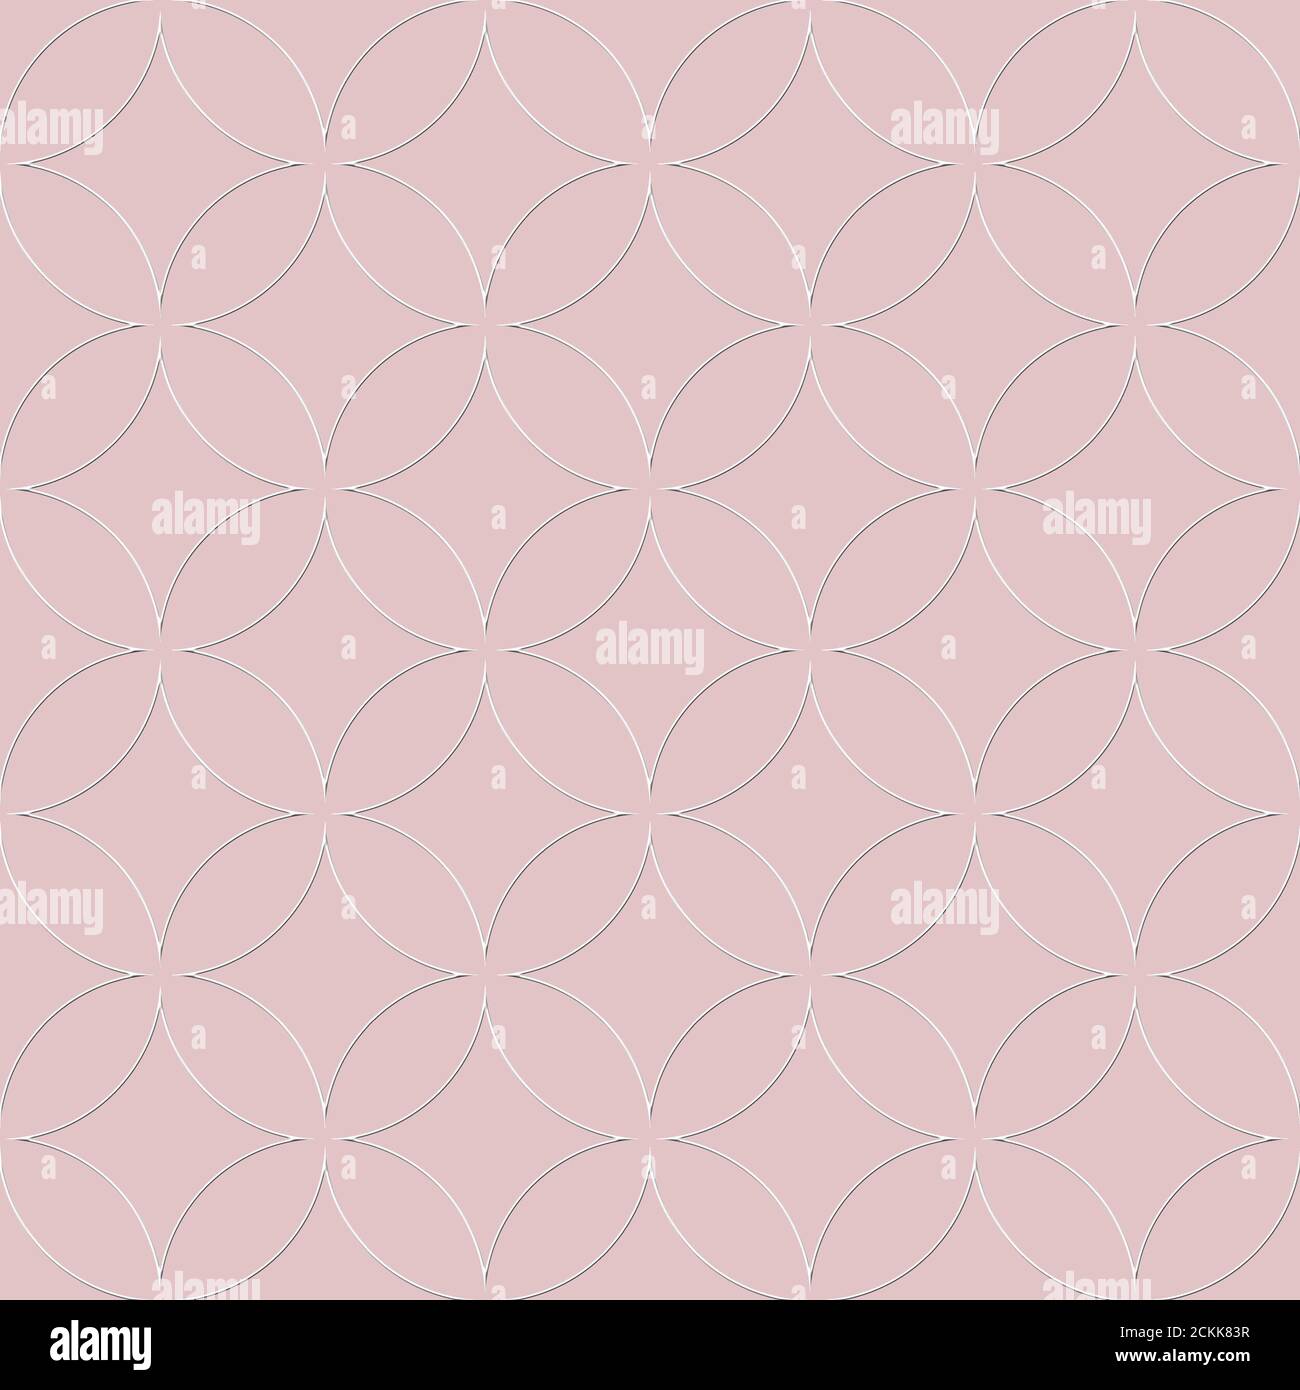 Vintage wedding invitation design template seamless pattern. White overlapping circles on pink background. Abstract geometric round shape sphere disc Stock Photo